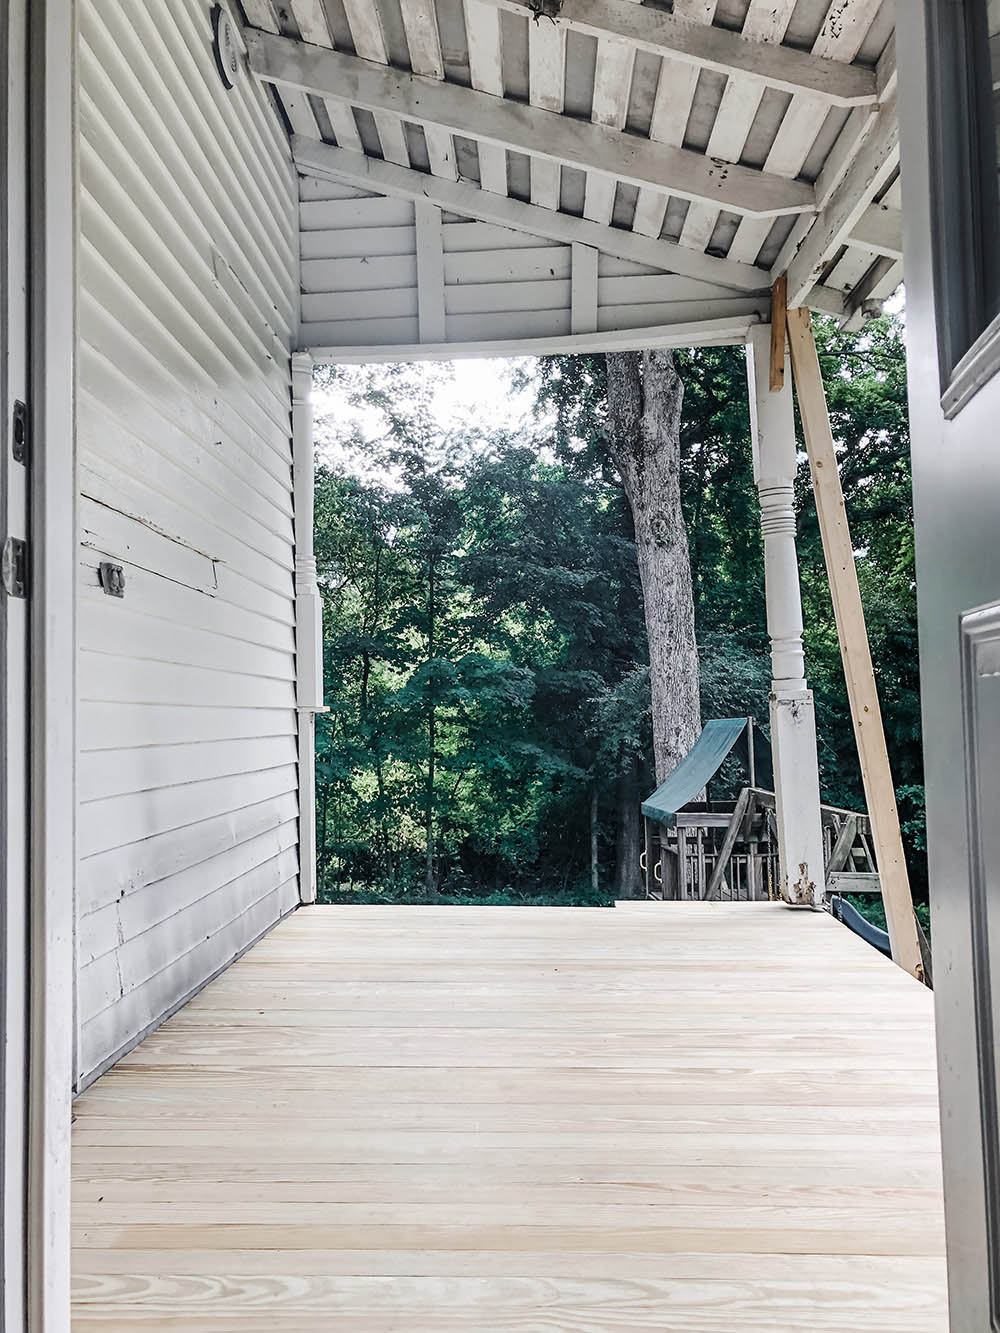 A back porch with new wooden flooring installed.